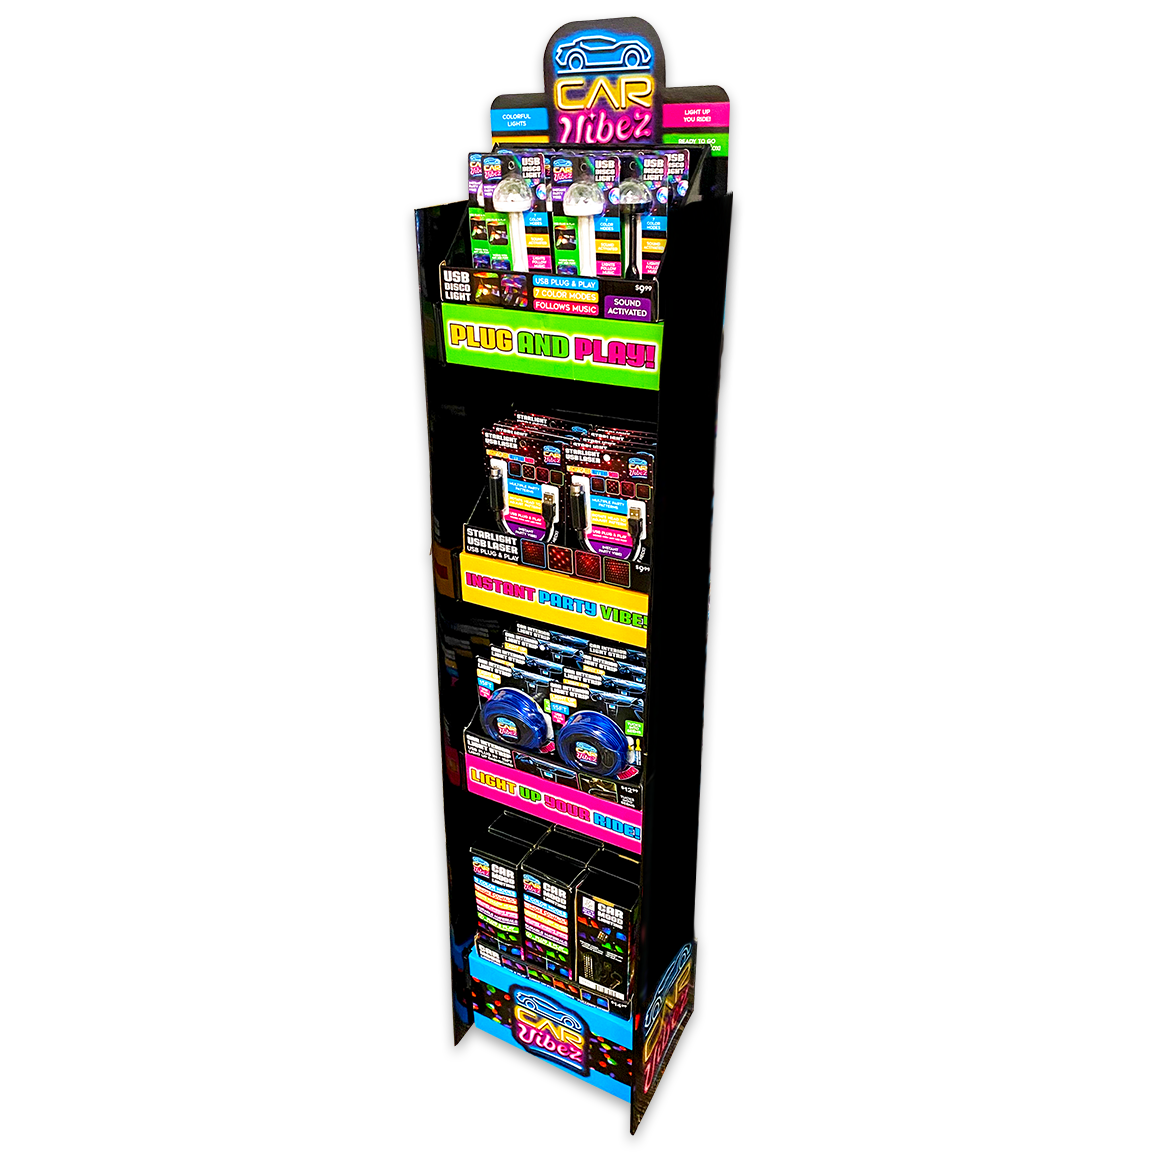 Car Lighting and Auto Accessories Assortment Floor Display - 40 Pieces Per Retail Ready Display 88540